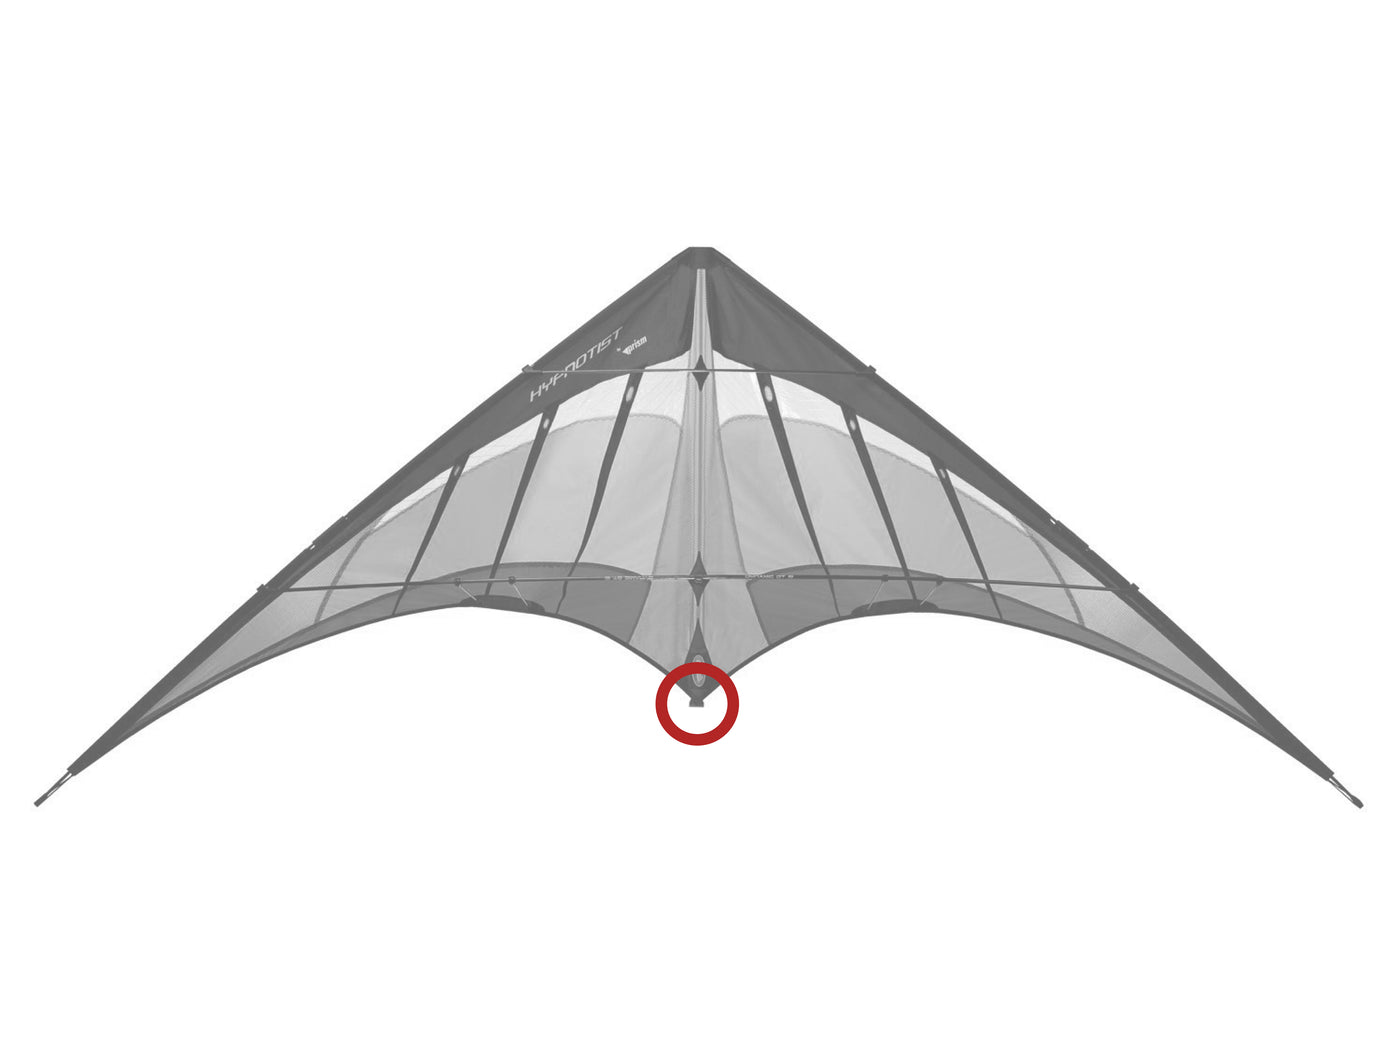 Diagram showing the location of the Kinetic Dissapator on the kite